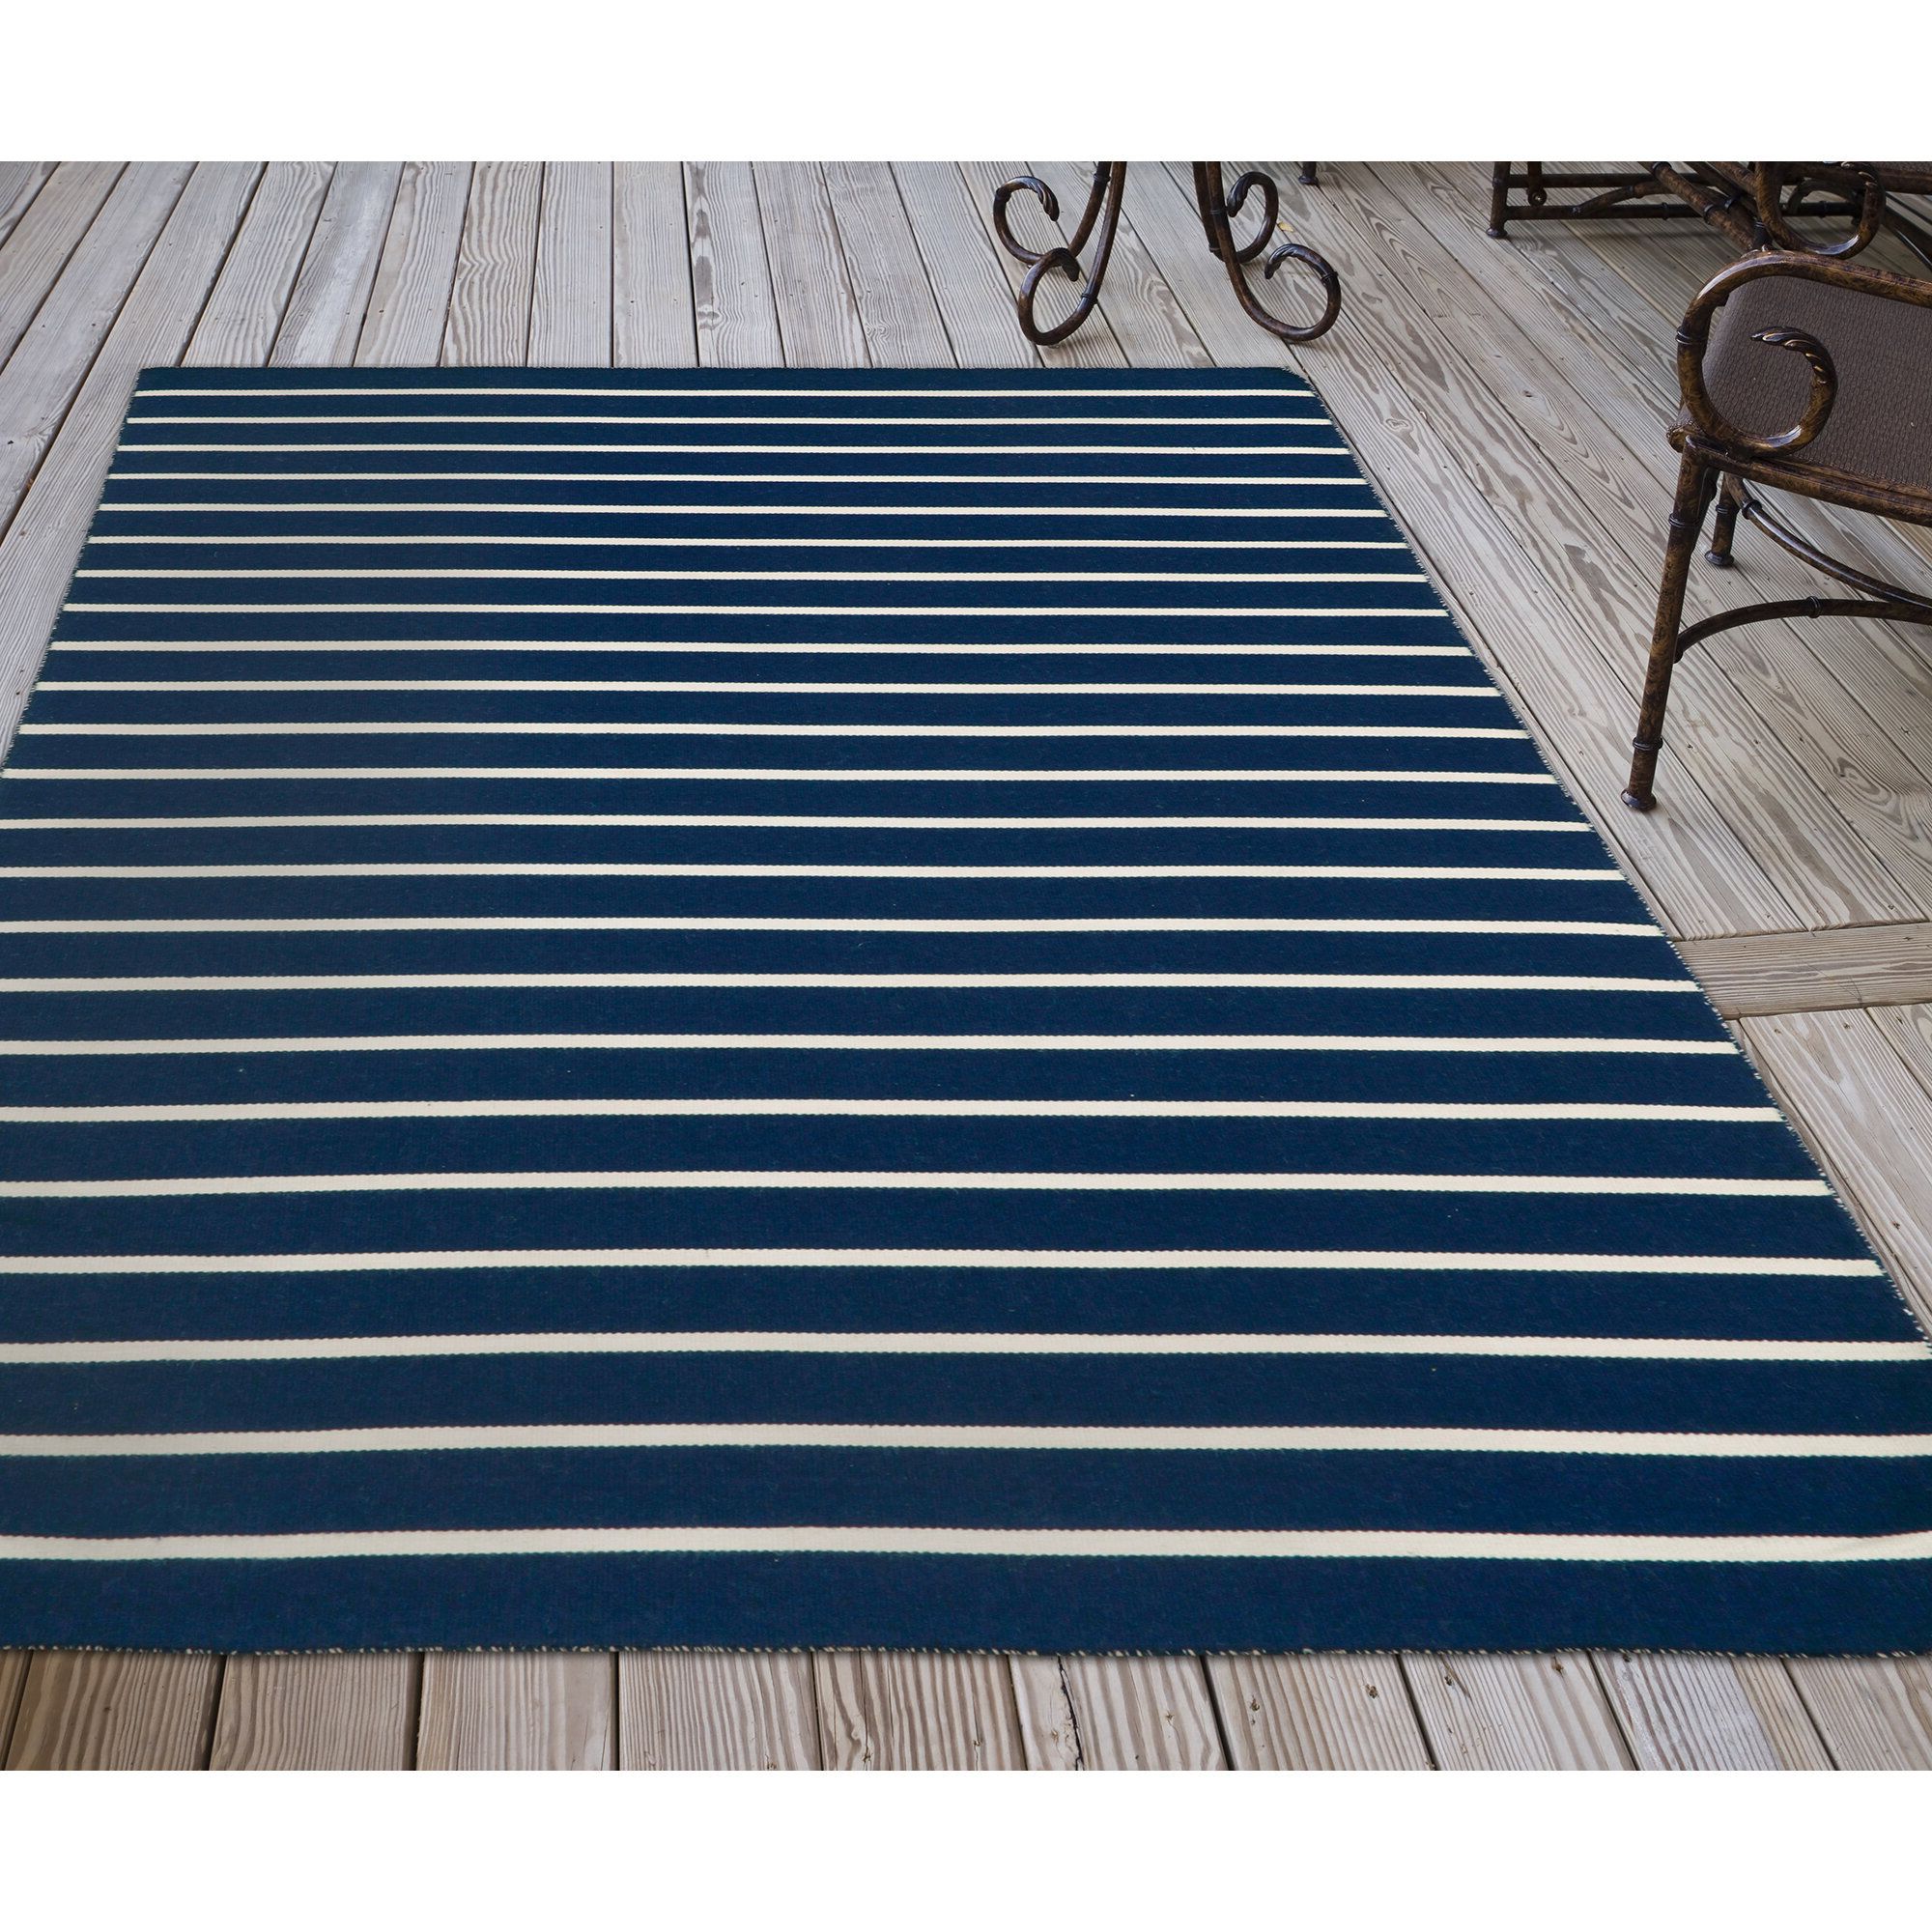 Preferred Navy Blue And White Striped Area Rug – Rugs Ideas Intended For Navy Blue And White Striped Ottomans (View 4 of 10)